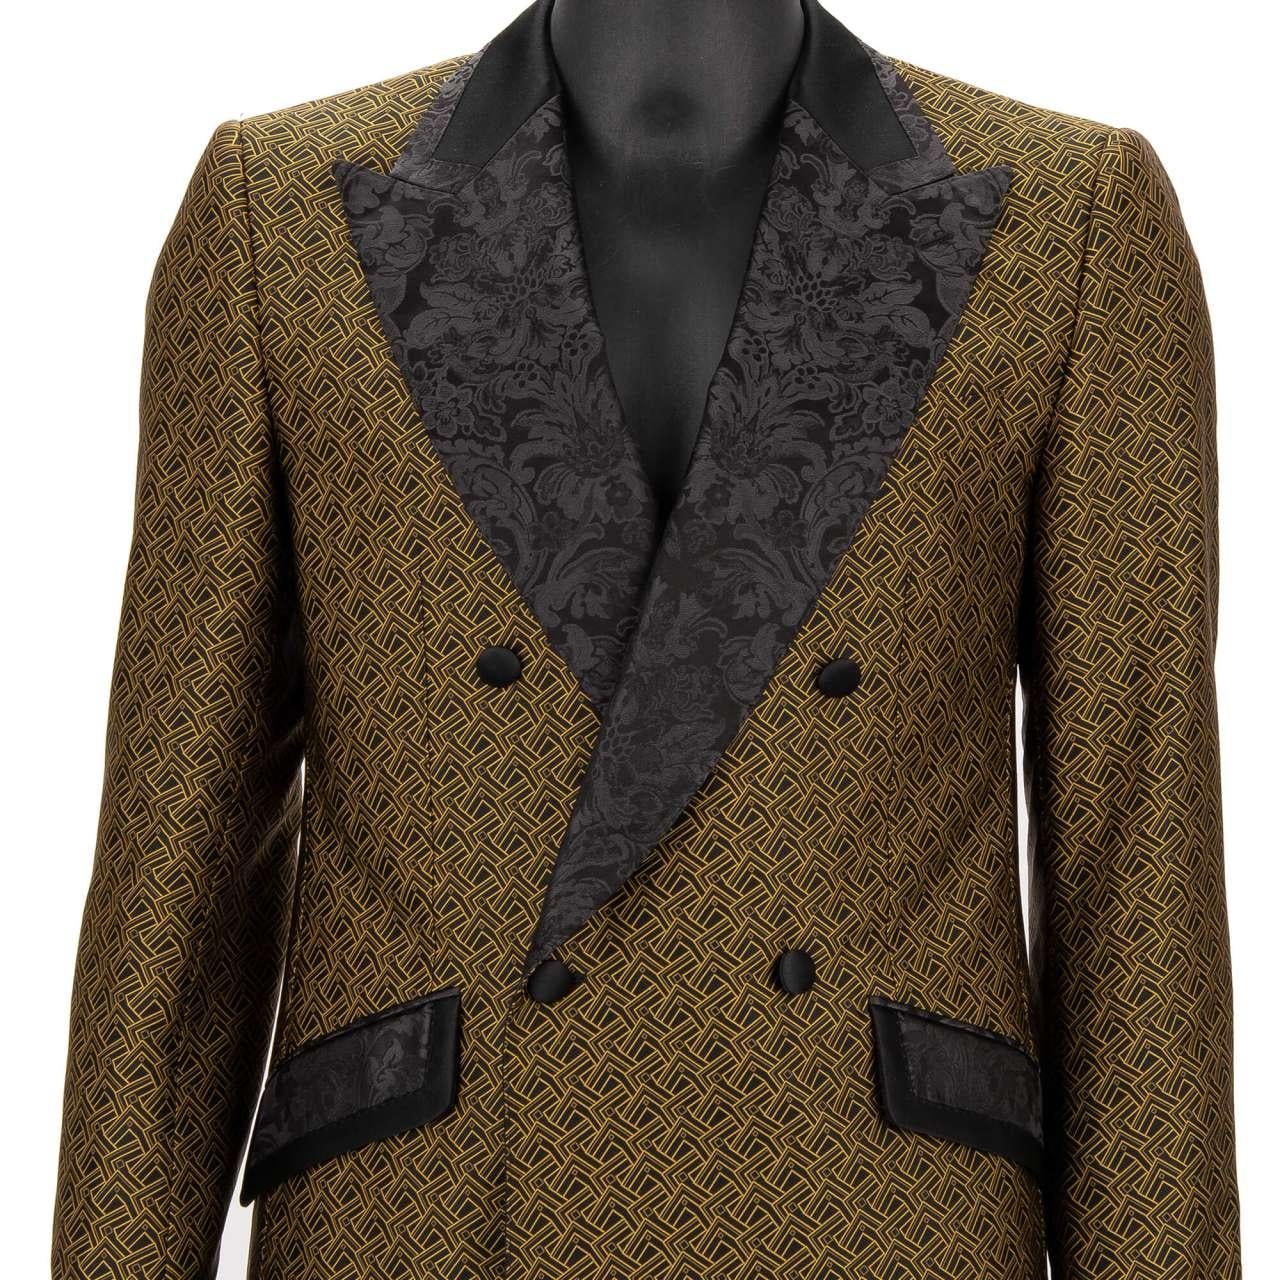 Dolce & Gabbana Baroque Jacquard Double breasted Suit Gold Black 48 US 38 M For Sale 3